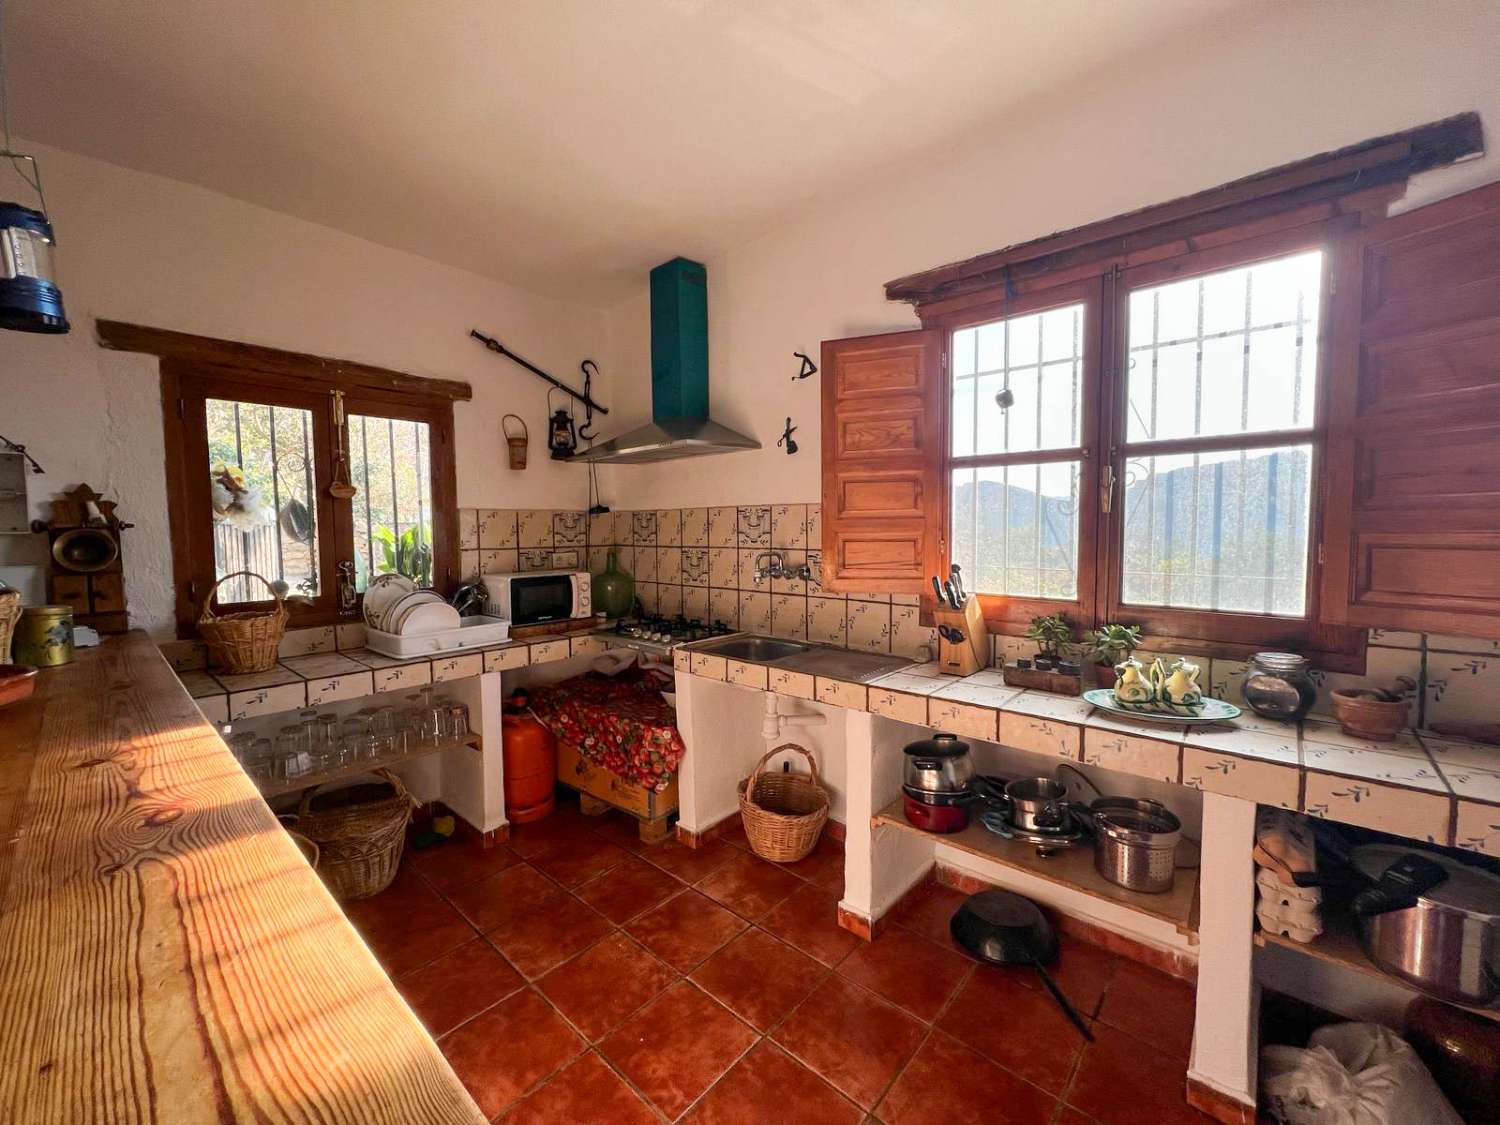 House for rent in Lanjarón